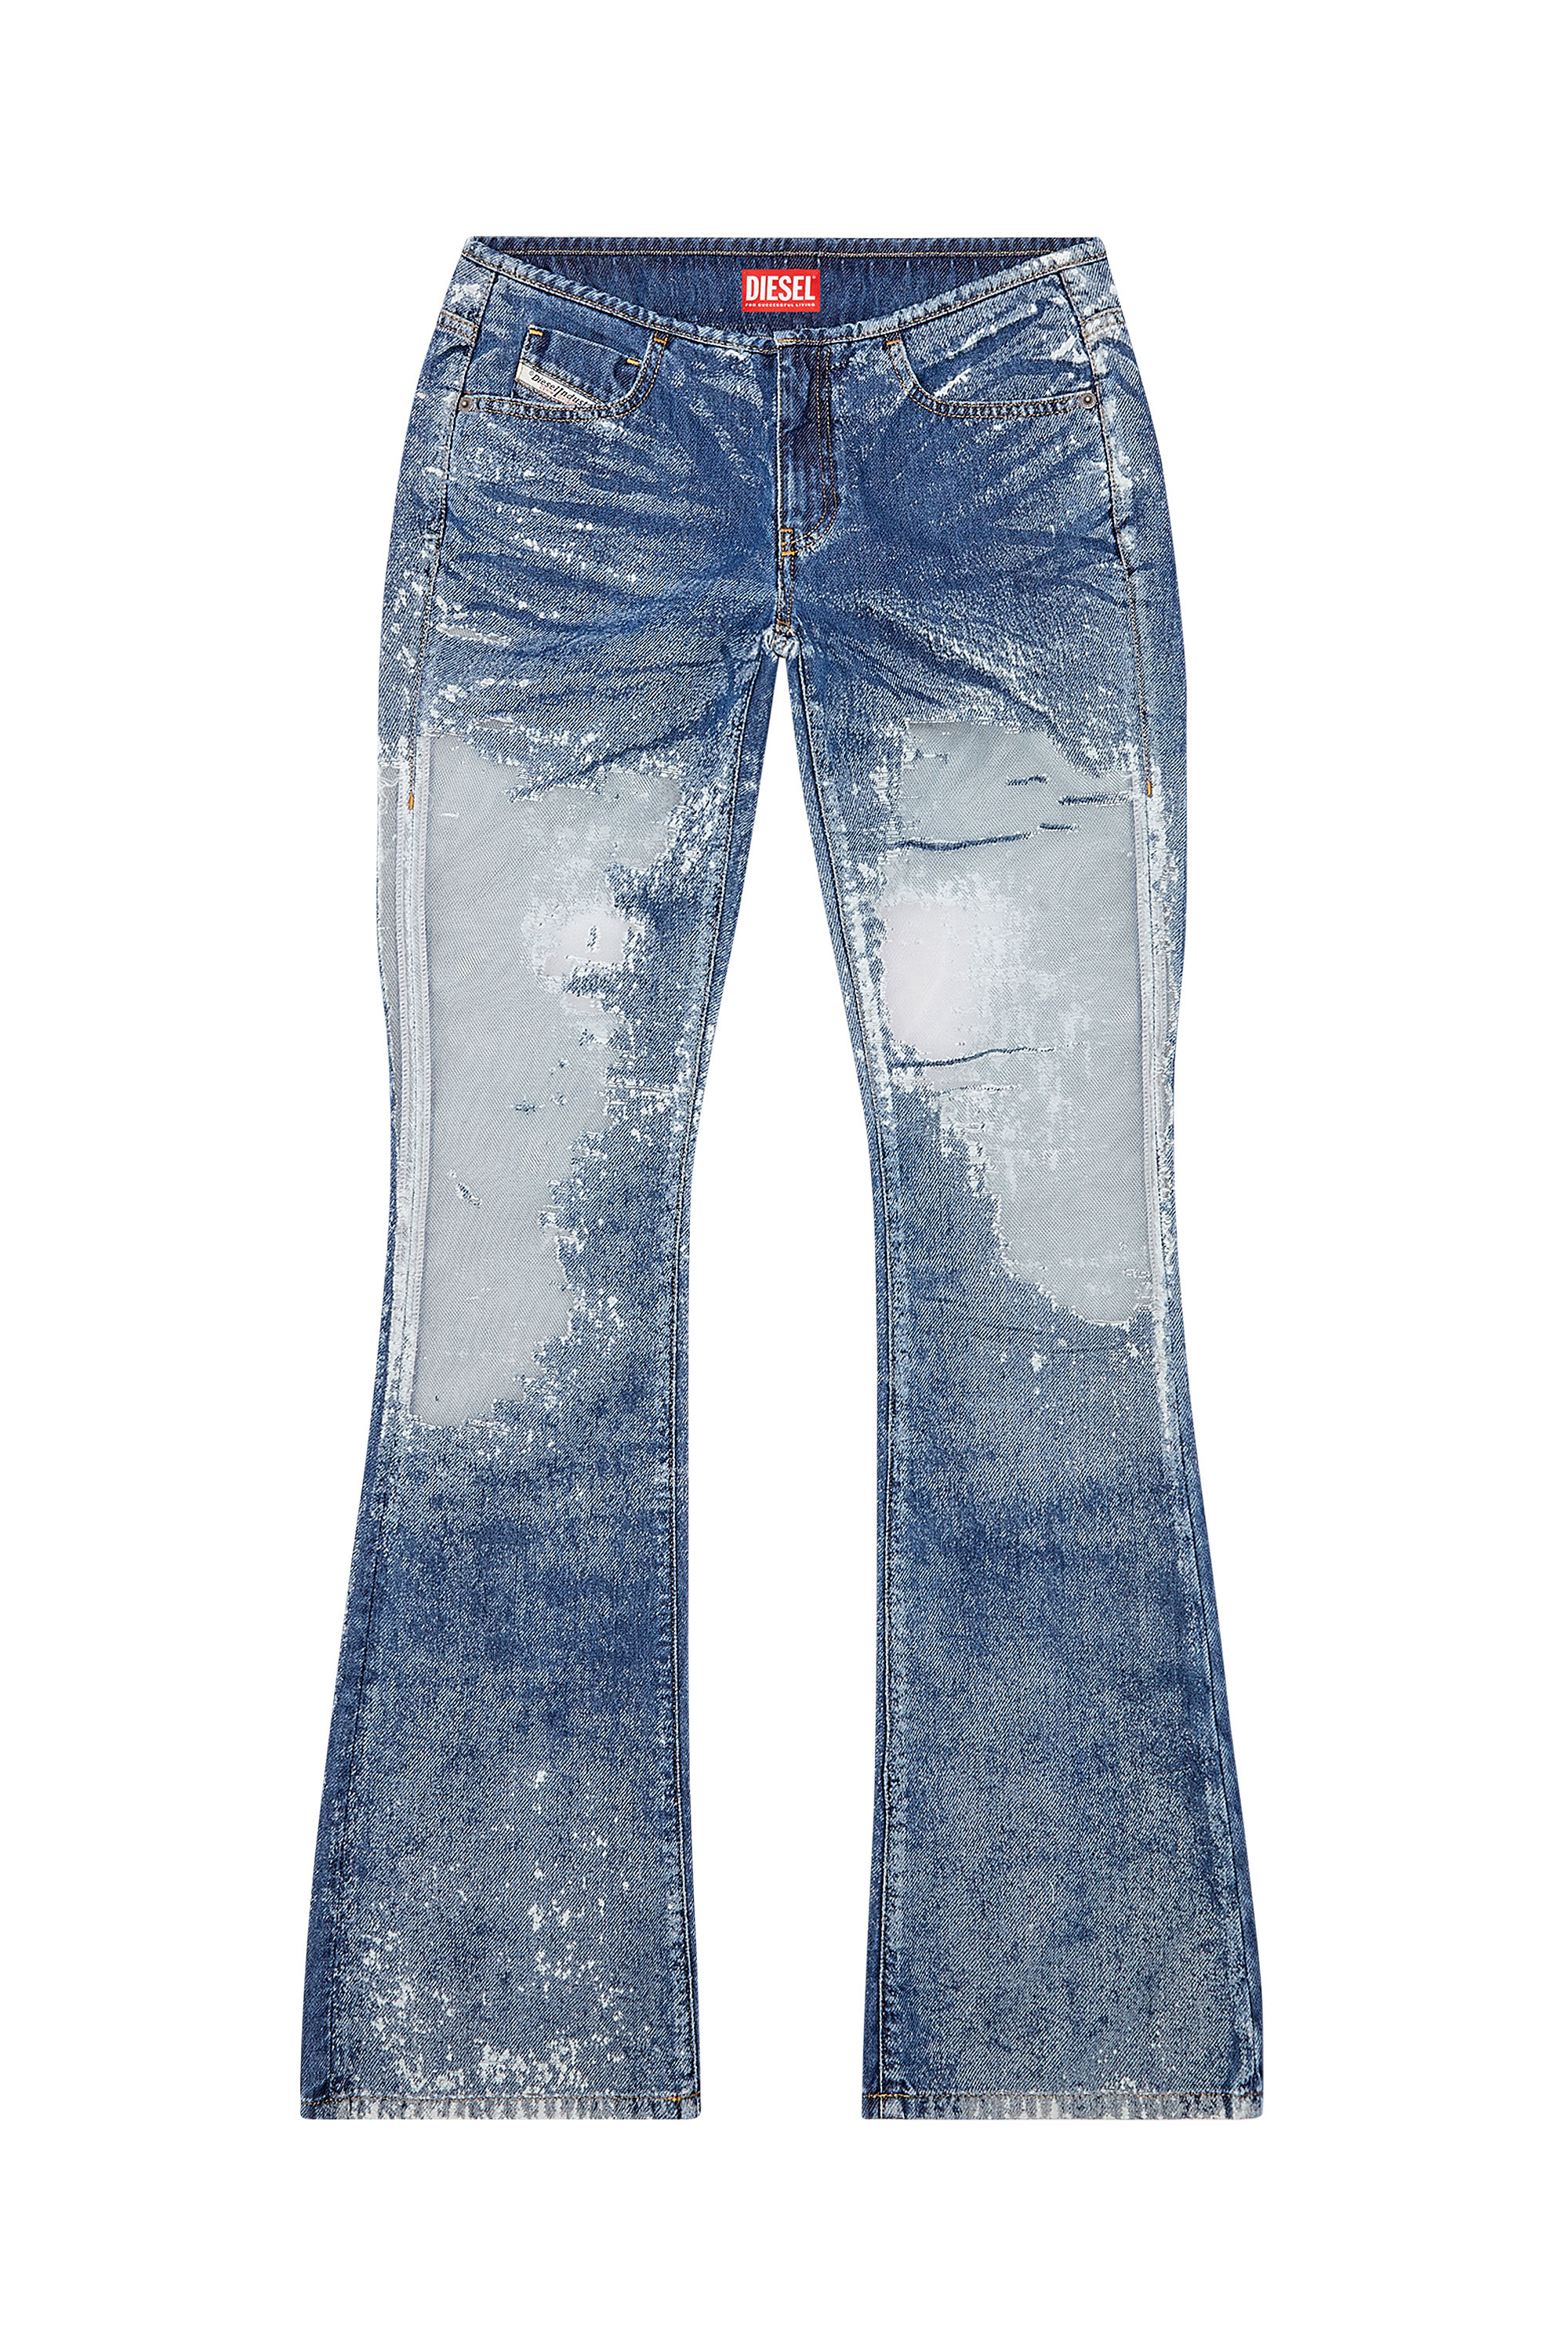 Bootcut and Flare Jeans D-Shark 068JH, Medium blue - Jeans